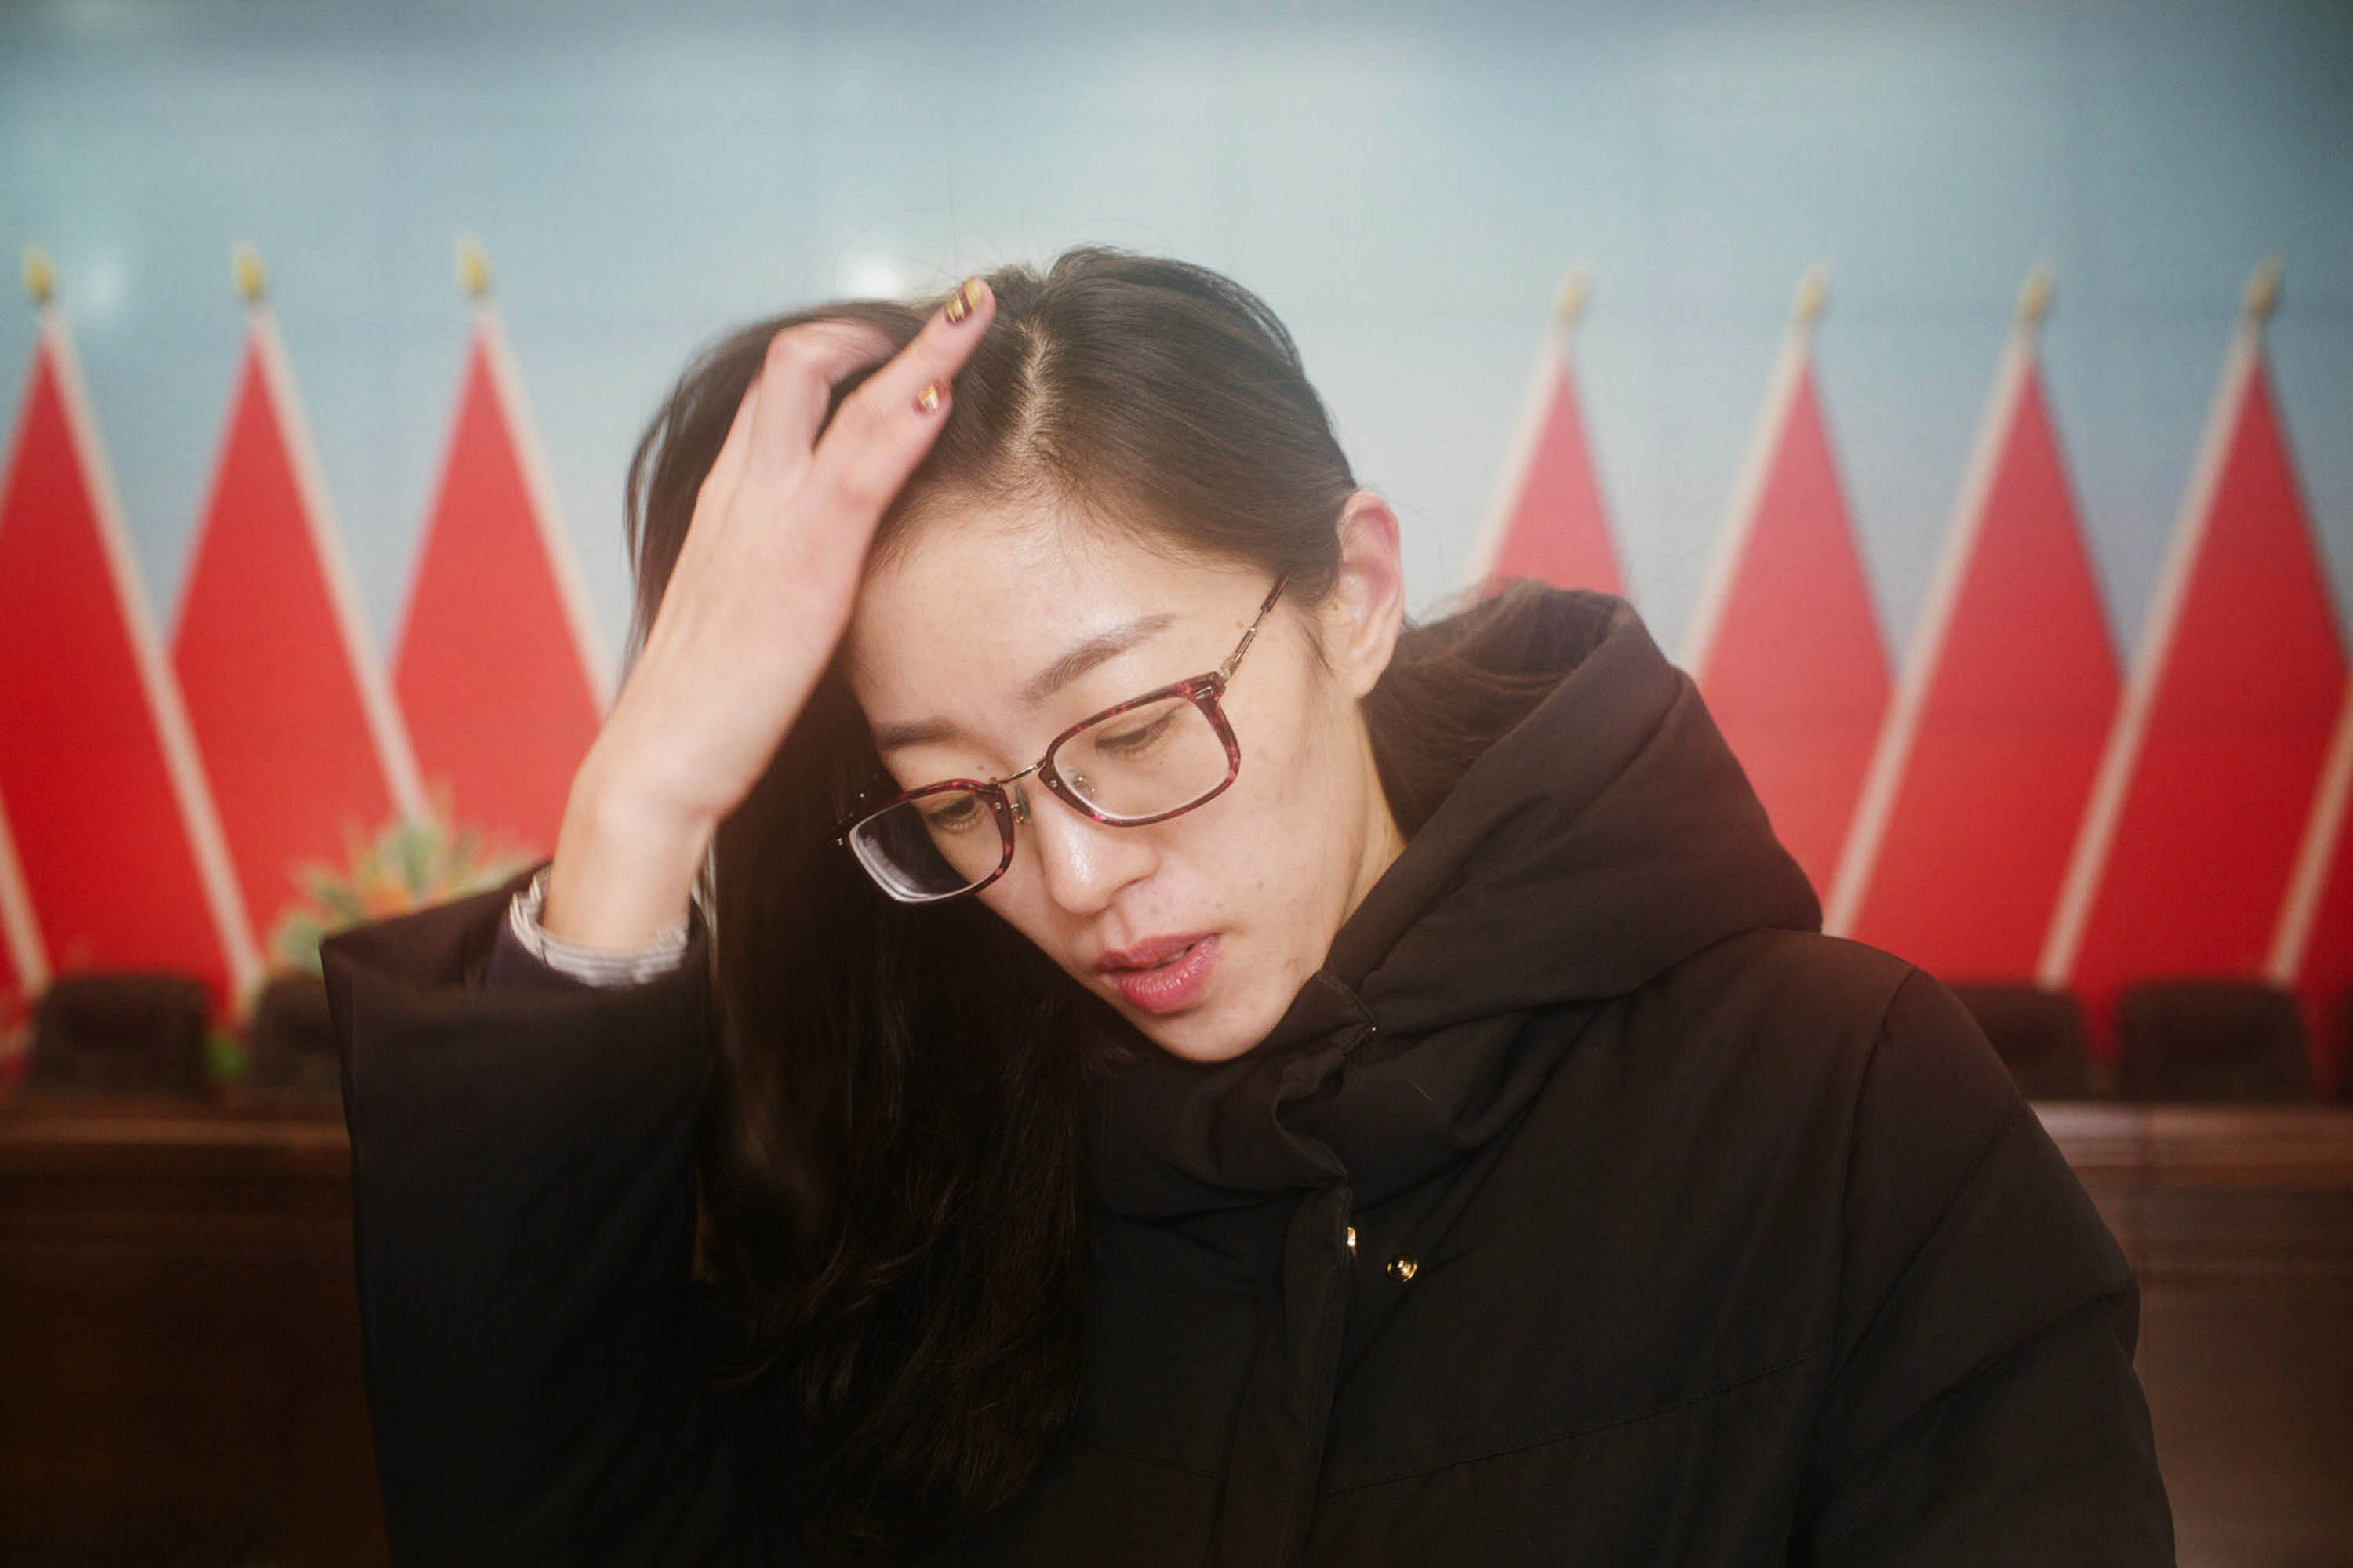 During a conference held to discuss staff restructuring, Ru Dongying waits to sign papers agreeing to the terms of her resignation, Jan. 14 2016. Ru left her job after being told she would have to face internal competition and reapply. Zhou Pinglang/Sixth Tone